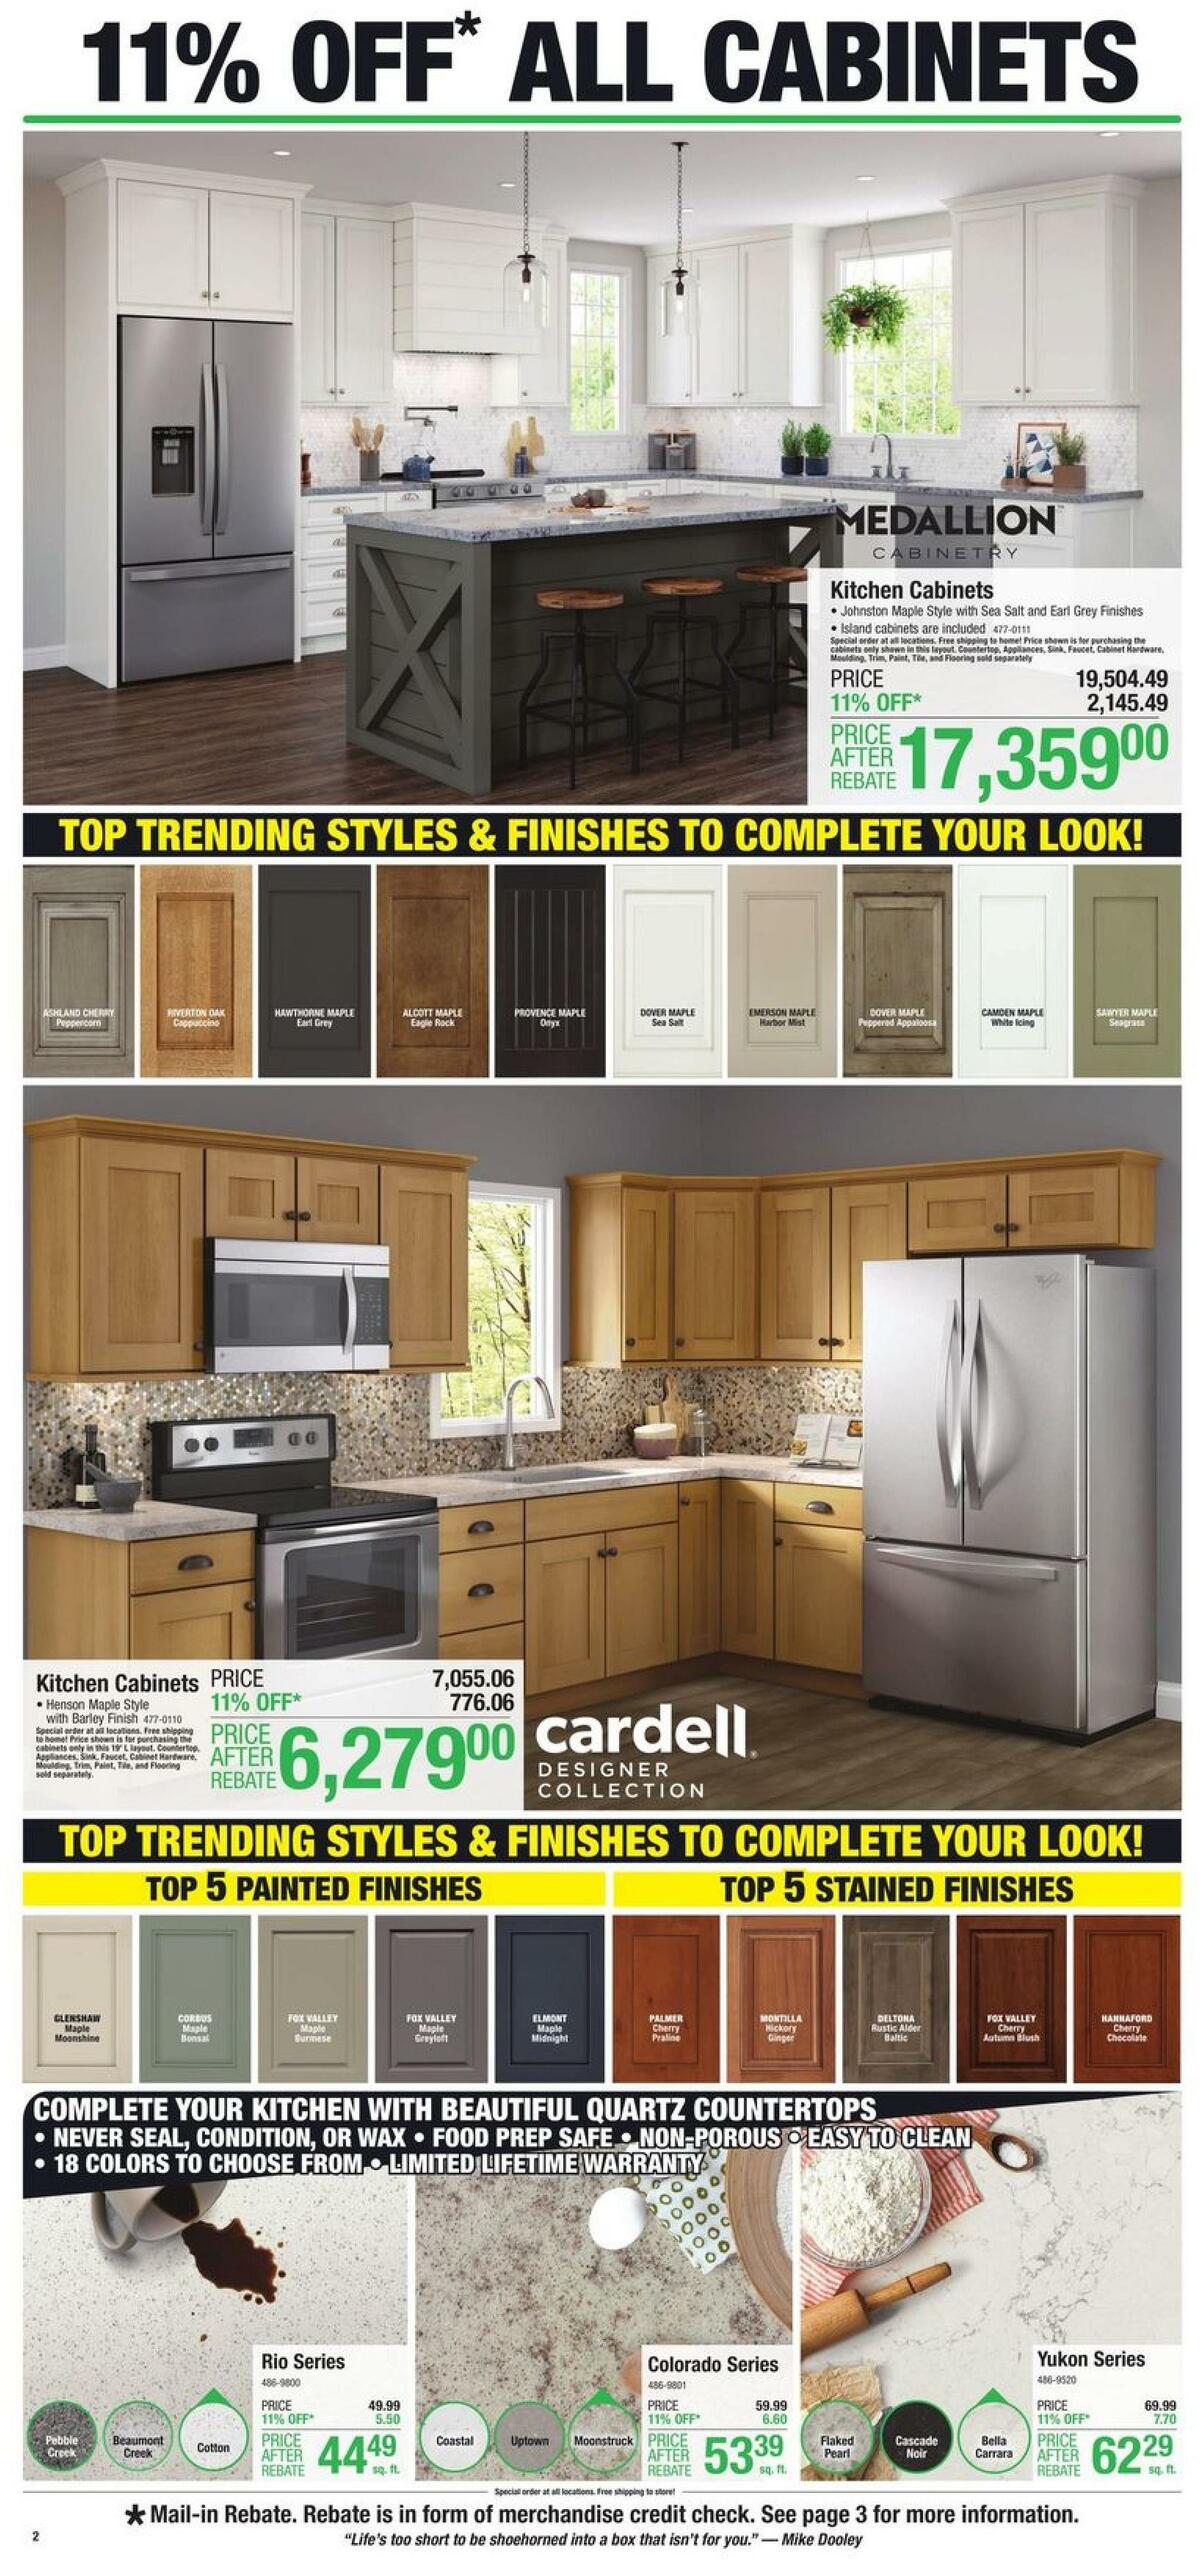 Menards 11% Off Your Dream Kitchen! Weekly Ad from August 25